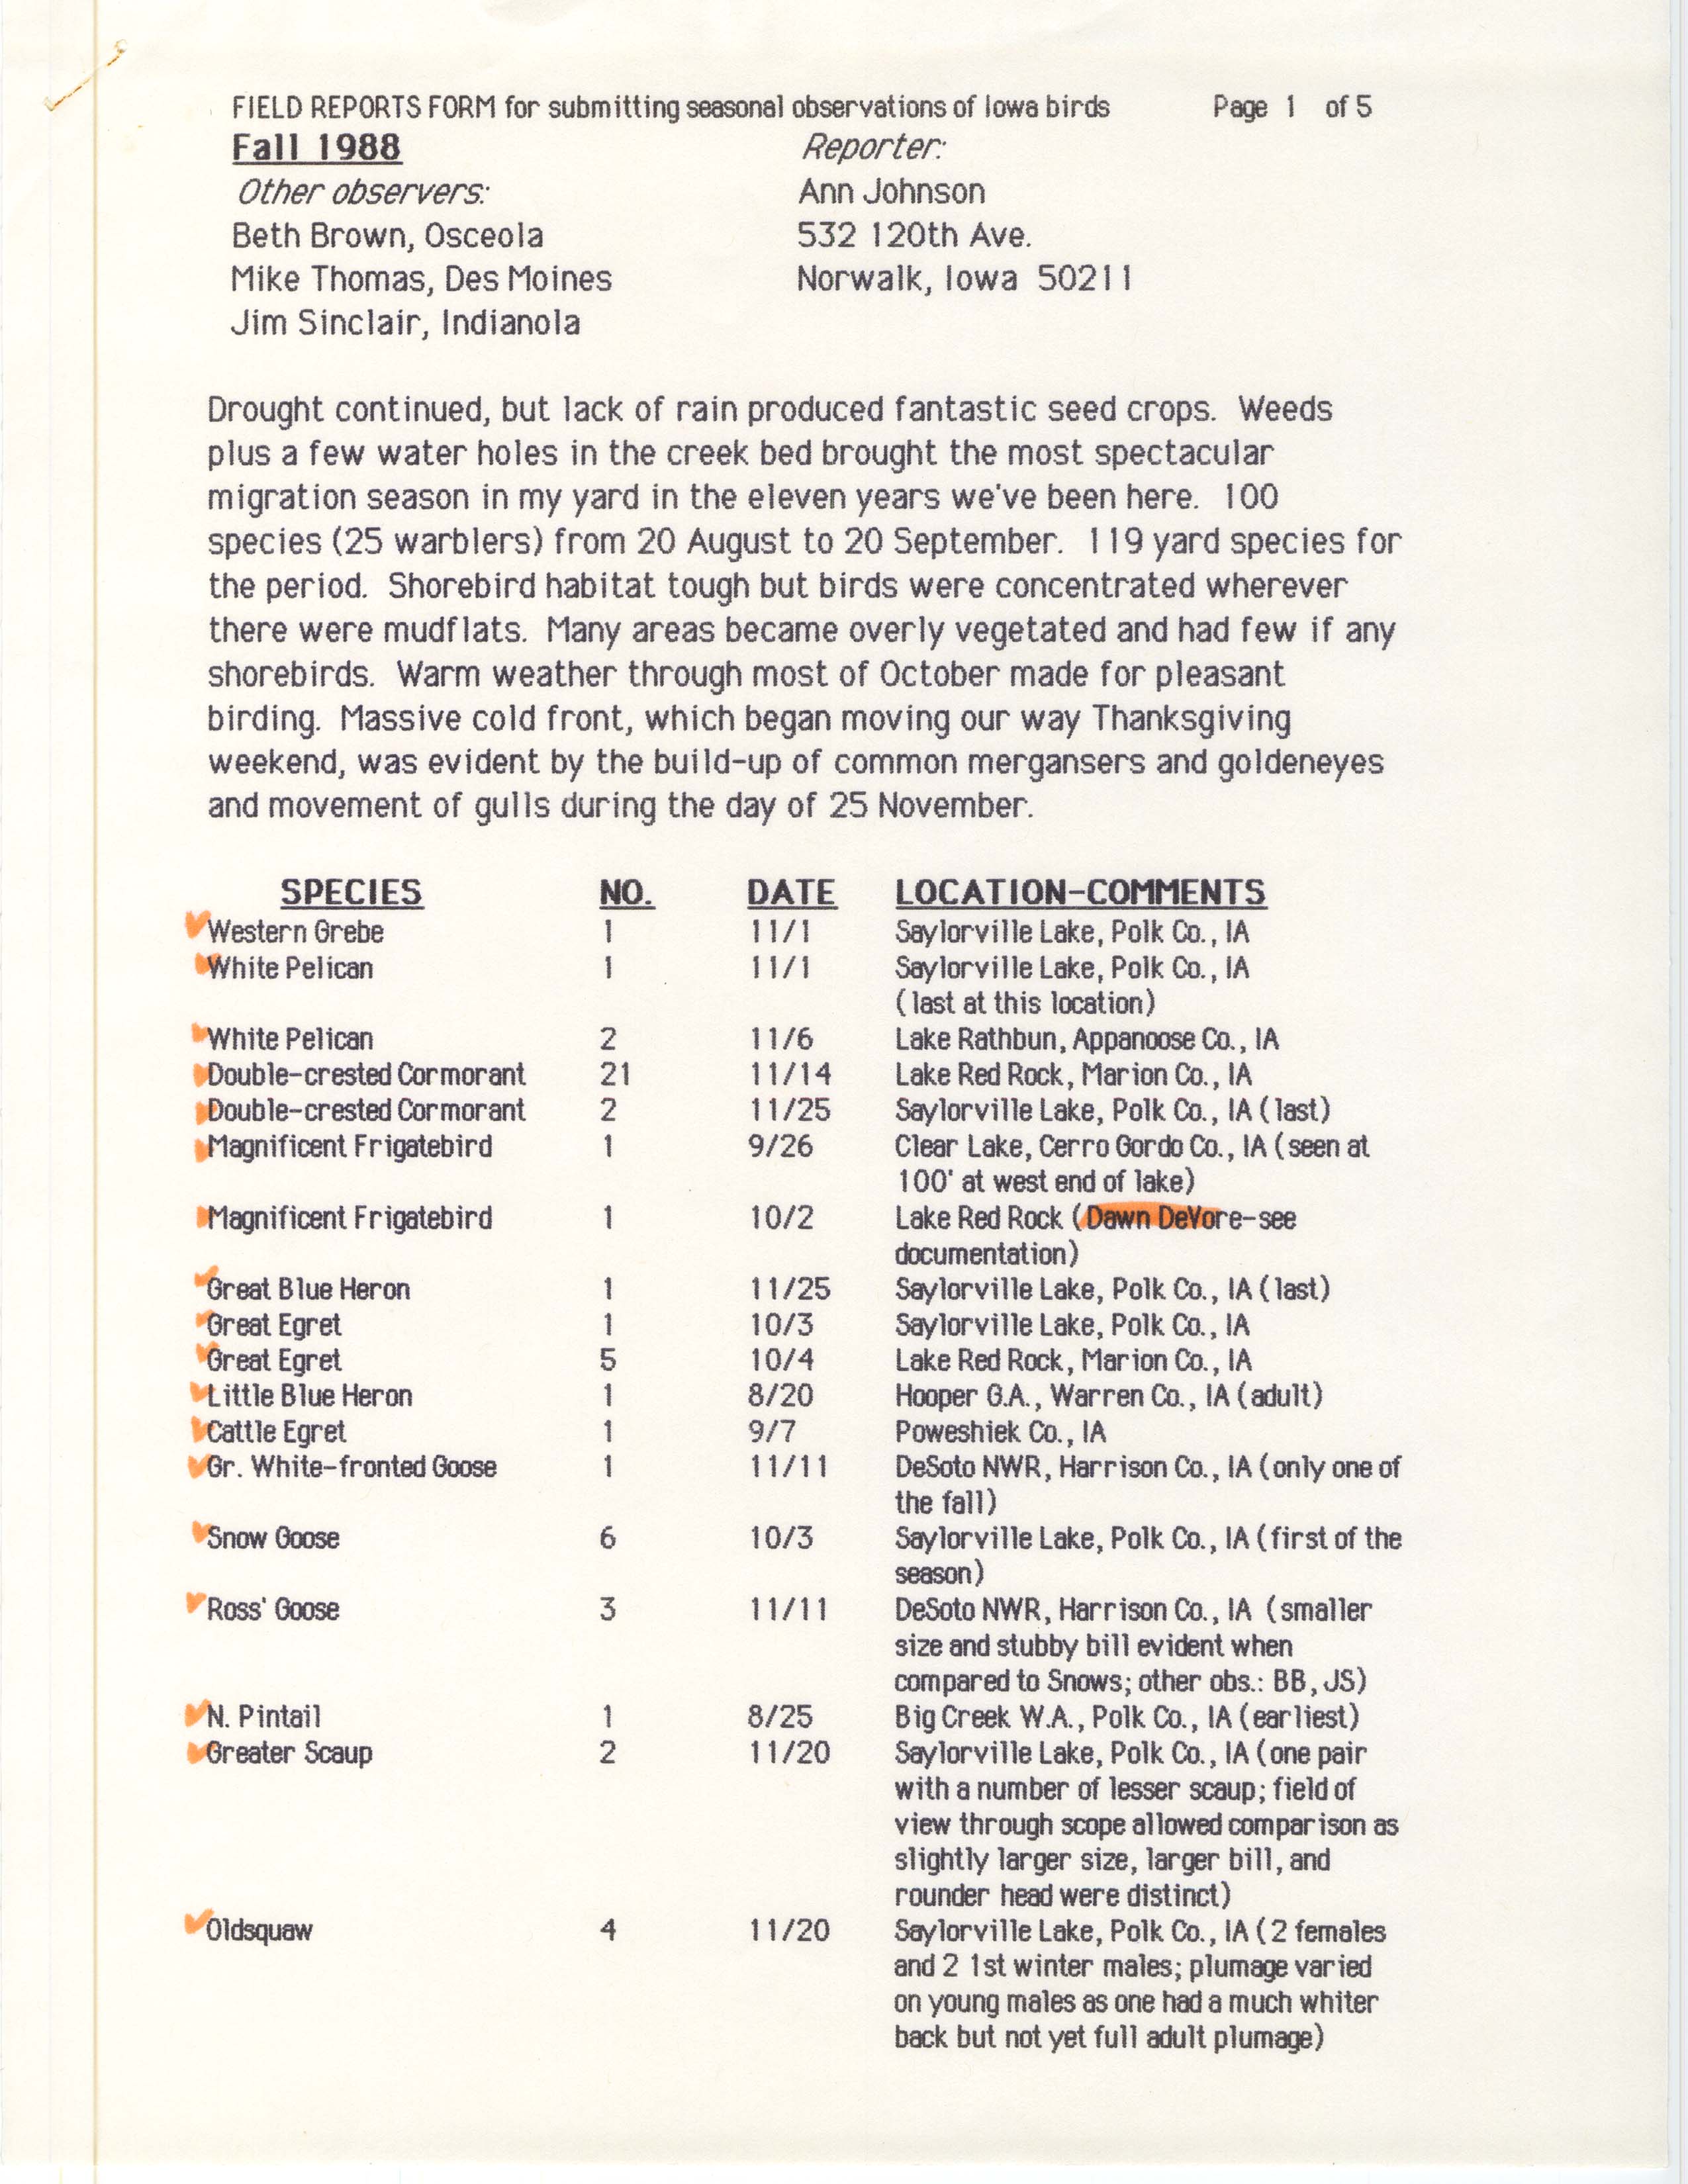 Field reports form for submitting seasonal observations of Iowa birds, Ann Johnson, fall 1988